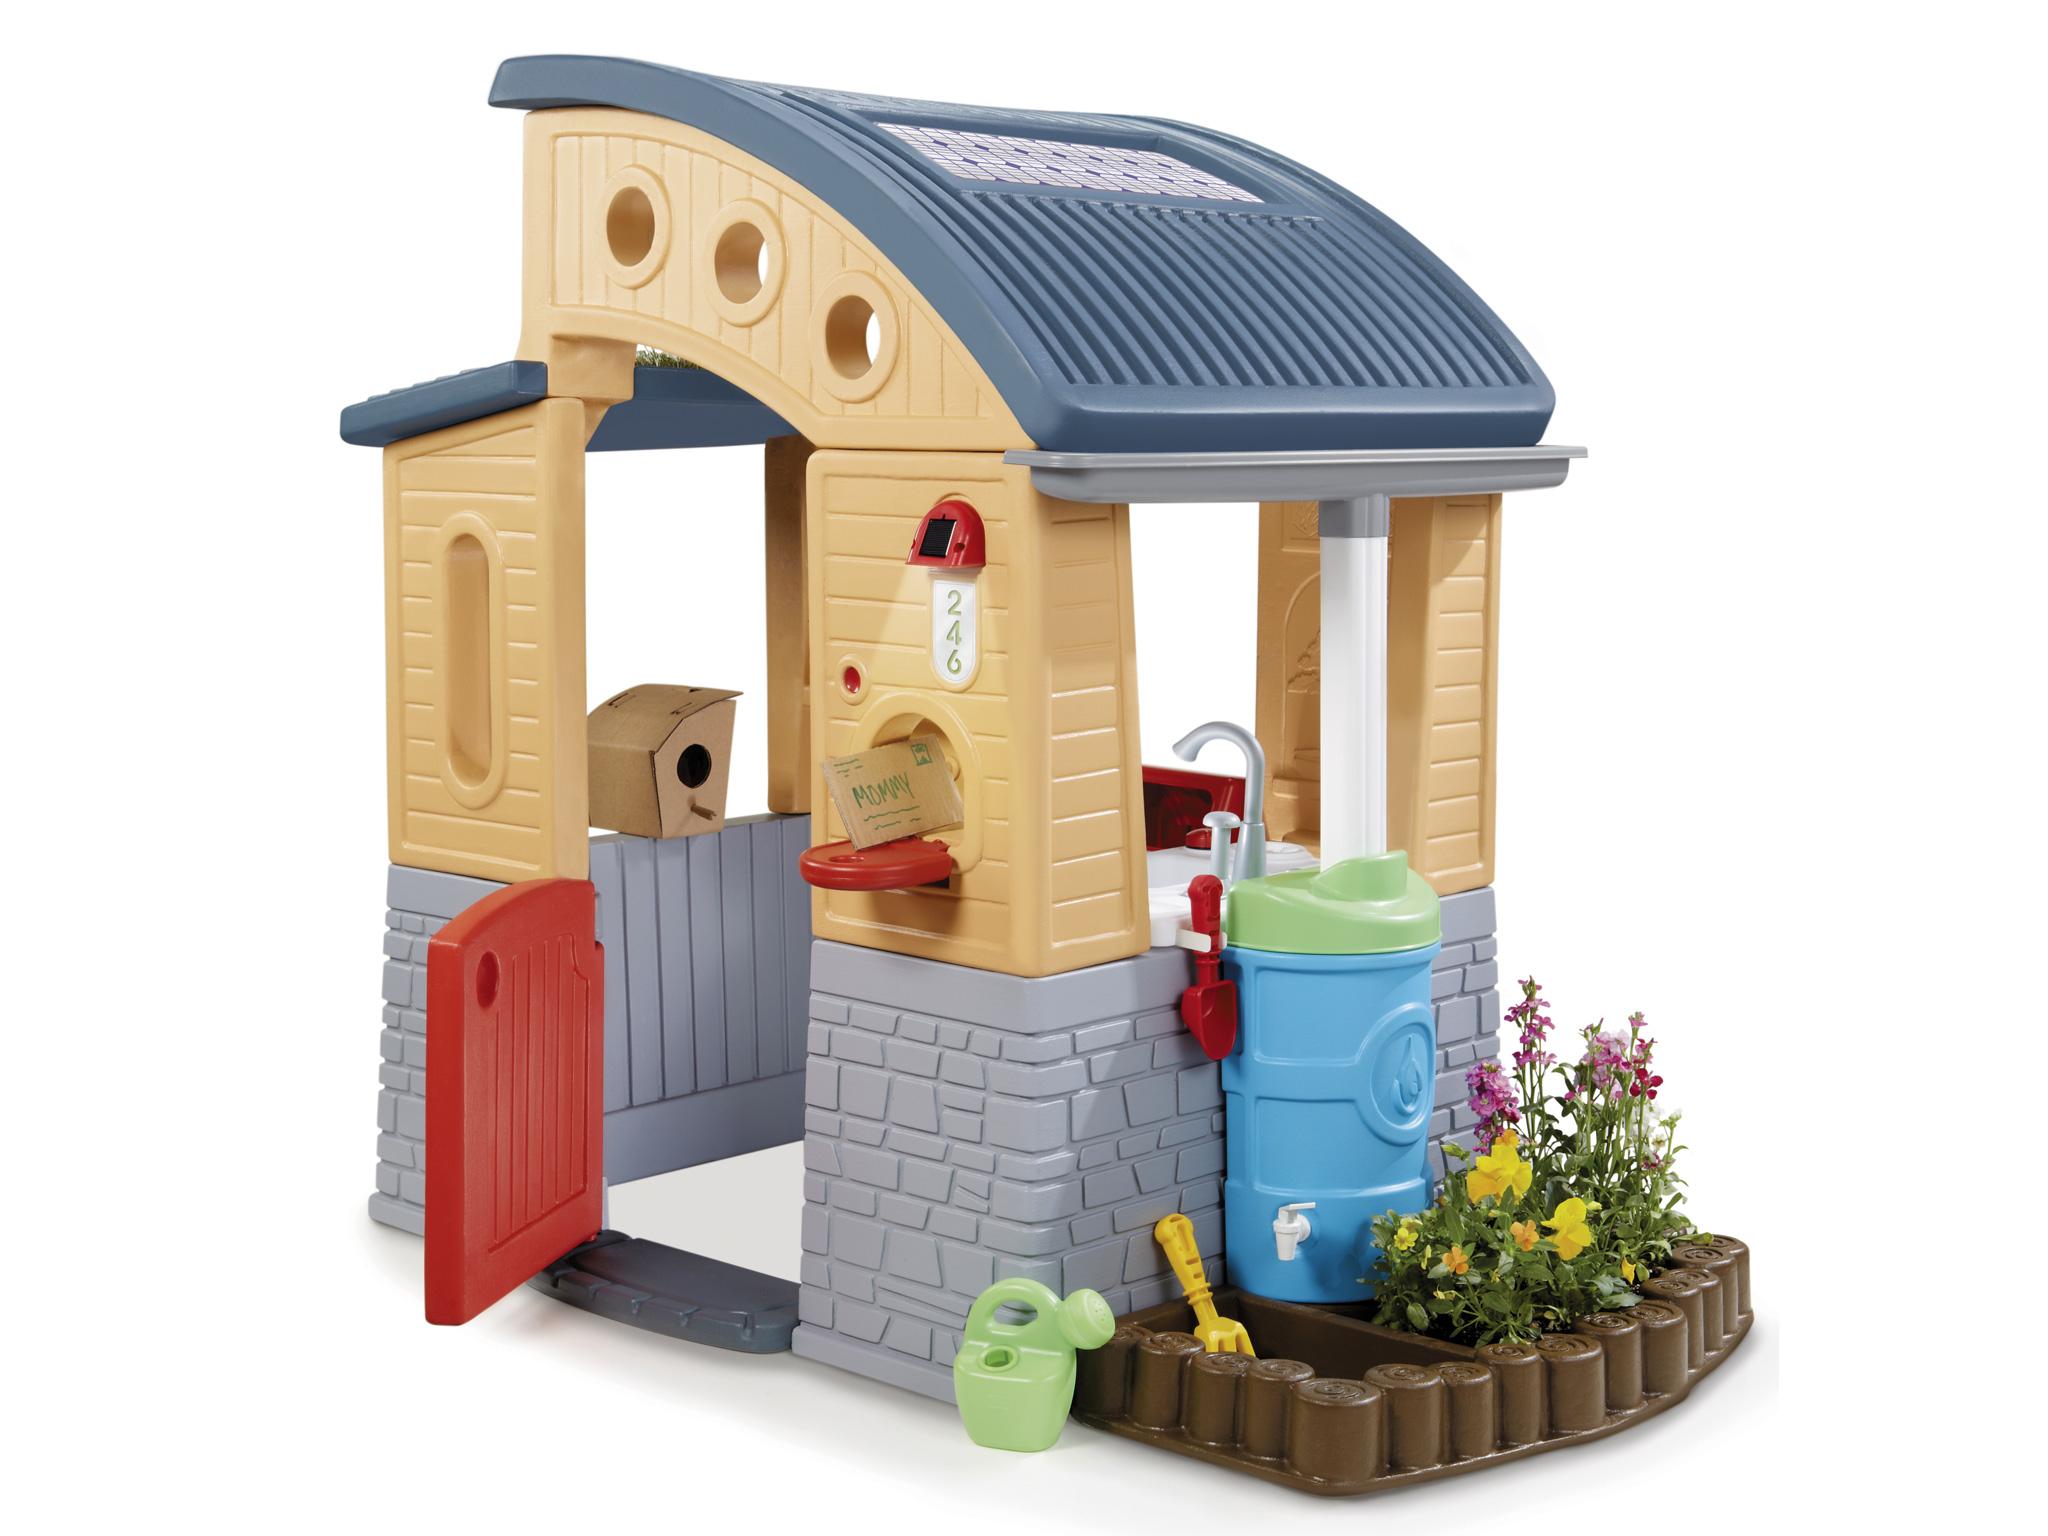 lidl wooden playhouse